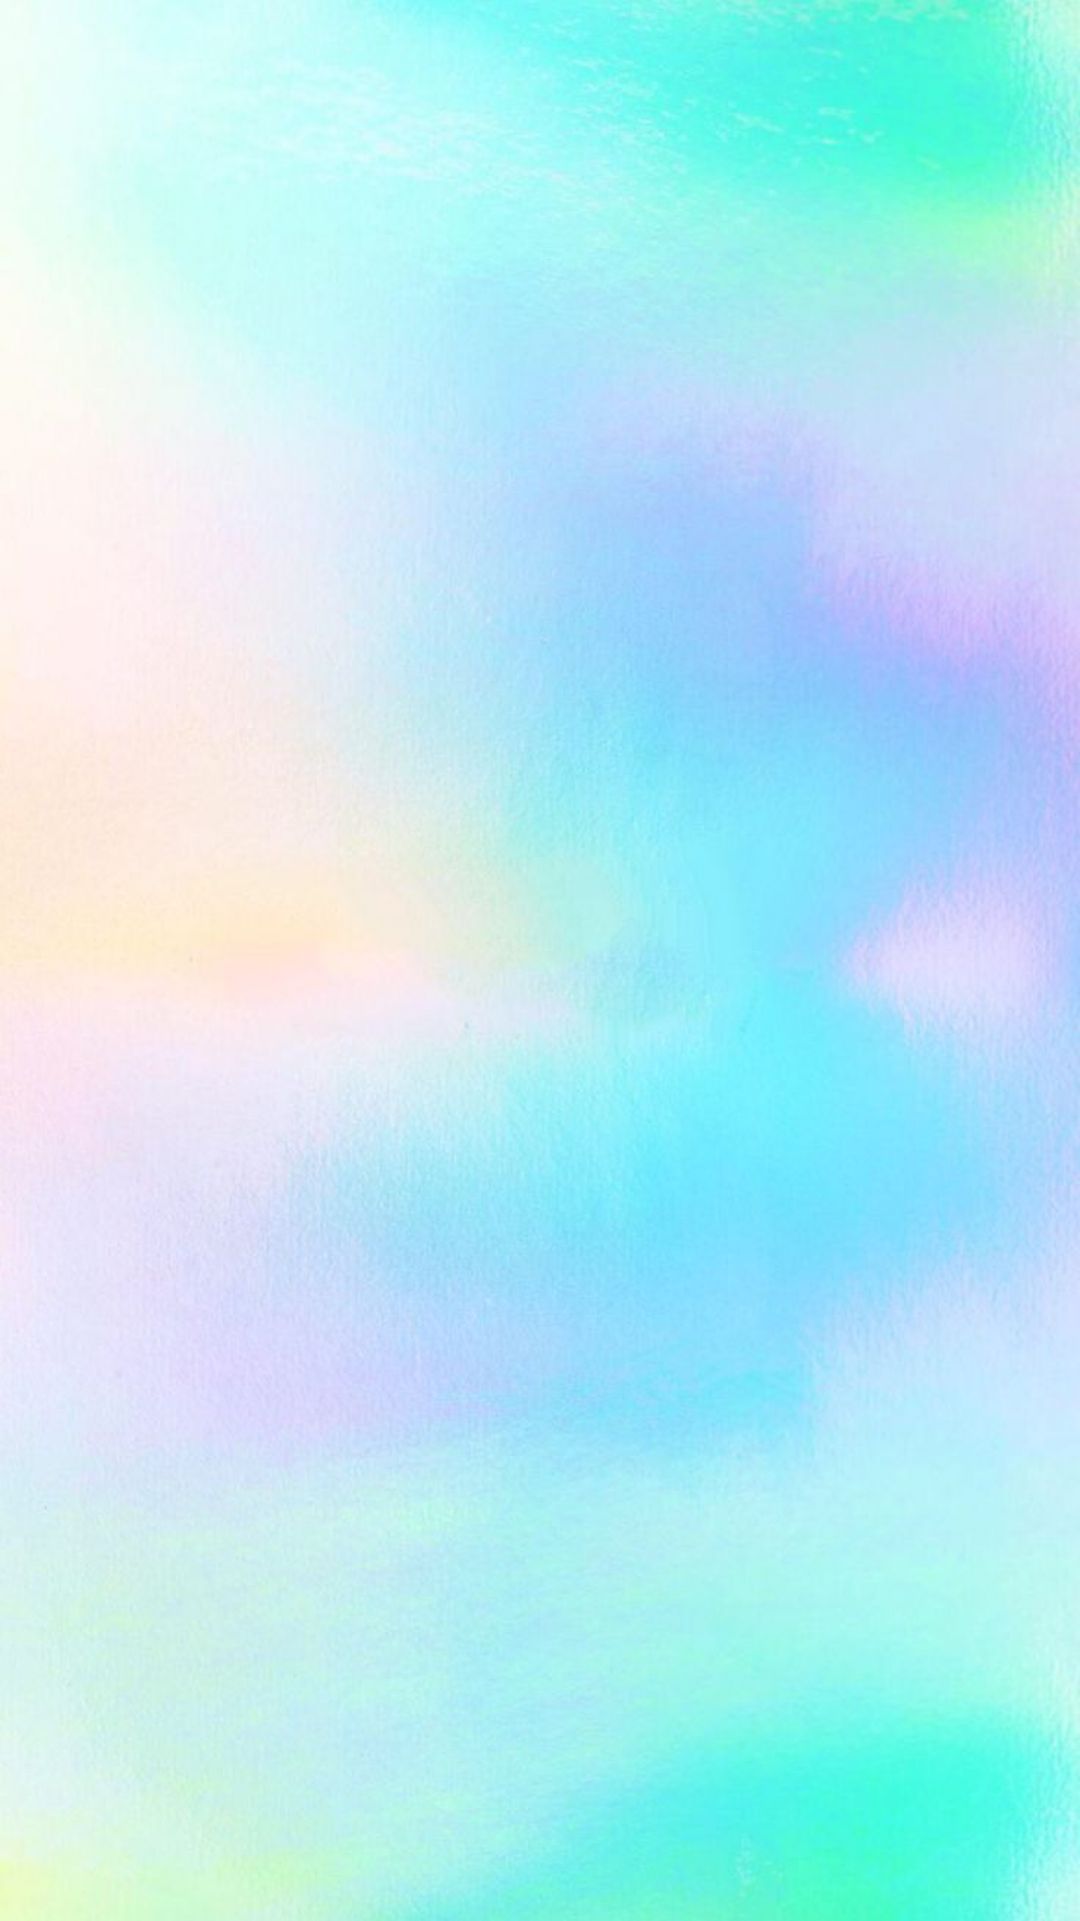 A colorful abstract background with water droplets - Pastel rainbow